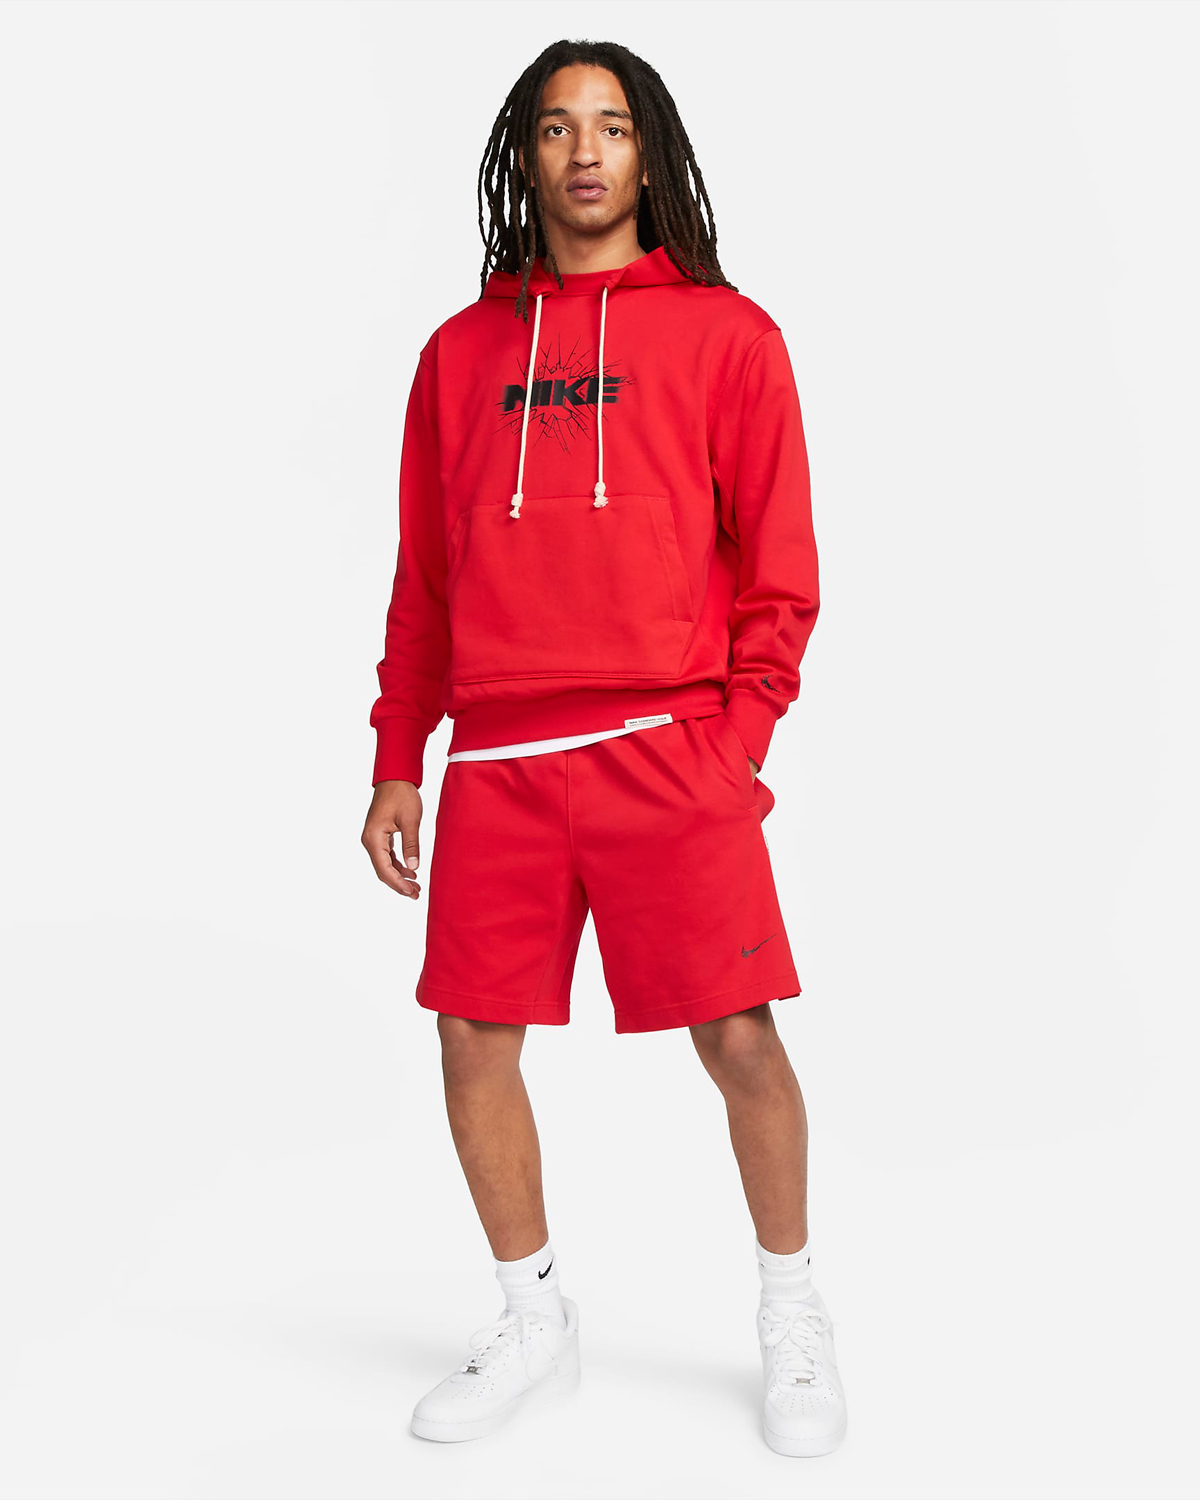 Nike-Standard-Issue-Basketball-Hoodie-University-Red-Outfit